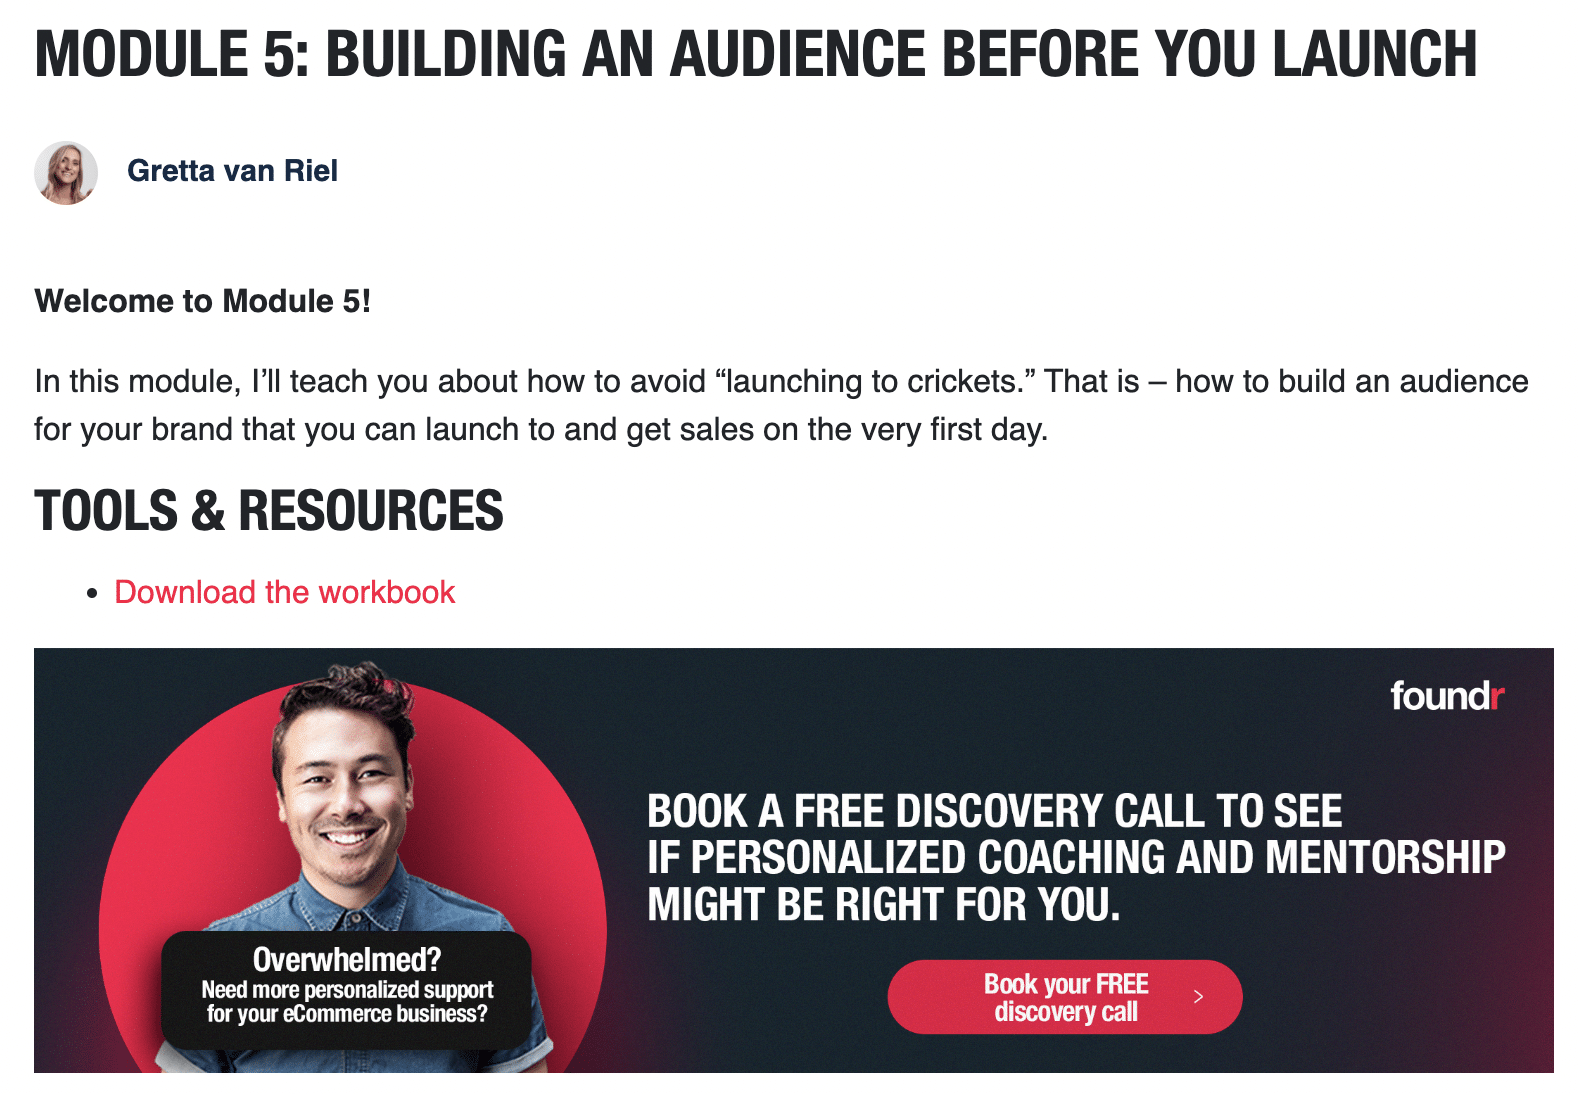 Module 5: Building An Audience Before Your Launch